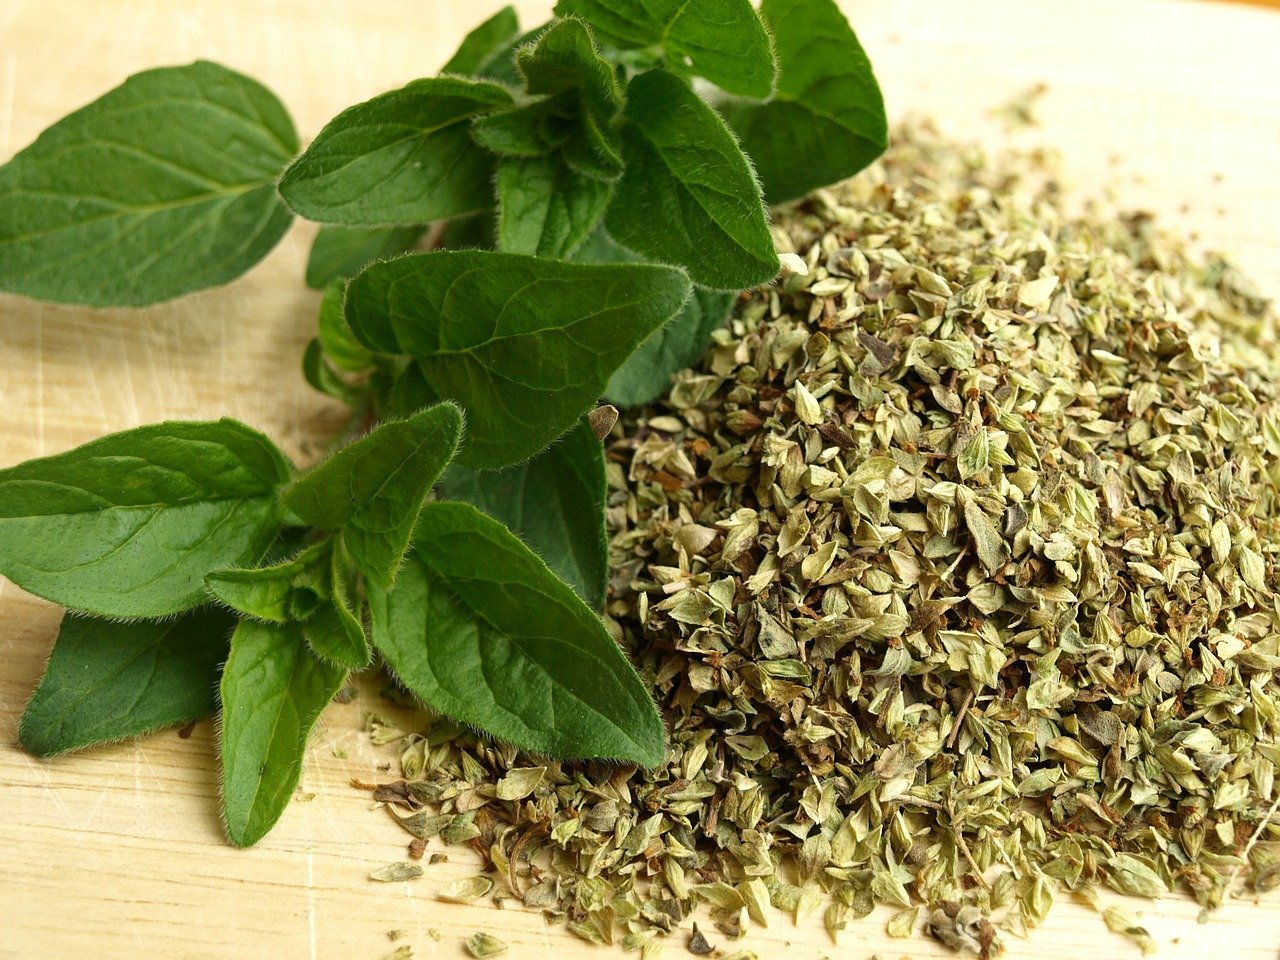 Discover the Healing Power of Herbs and Spices: Oregano, Cumin, and Bay Leaves